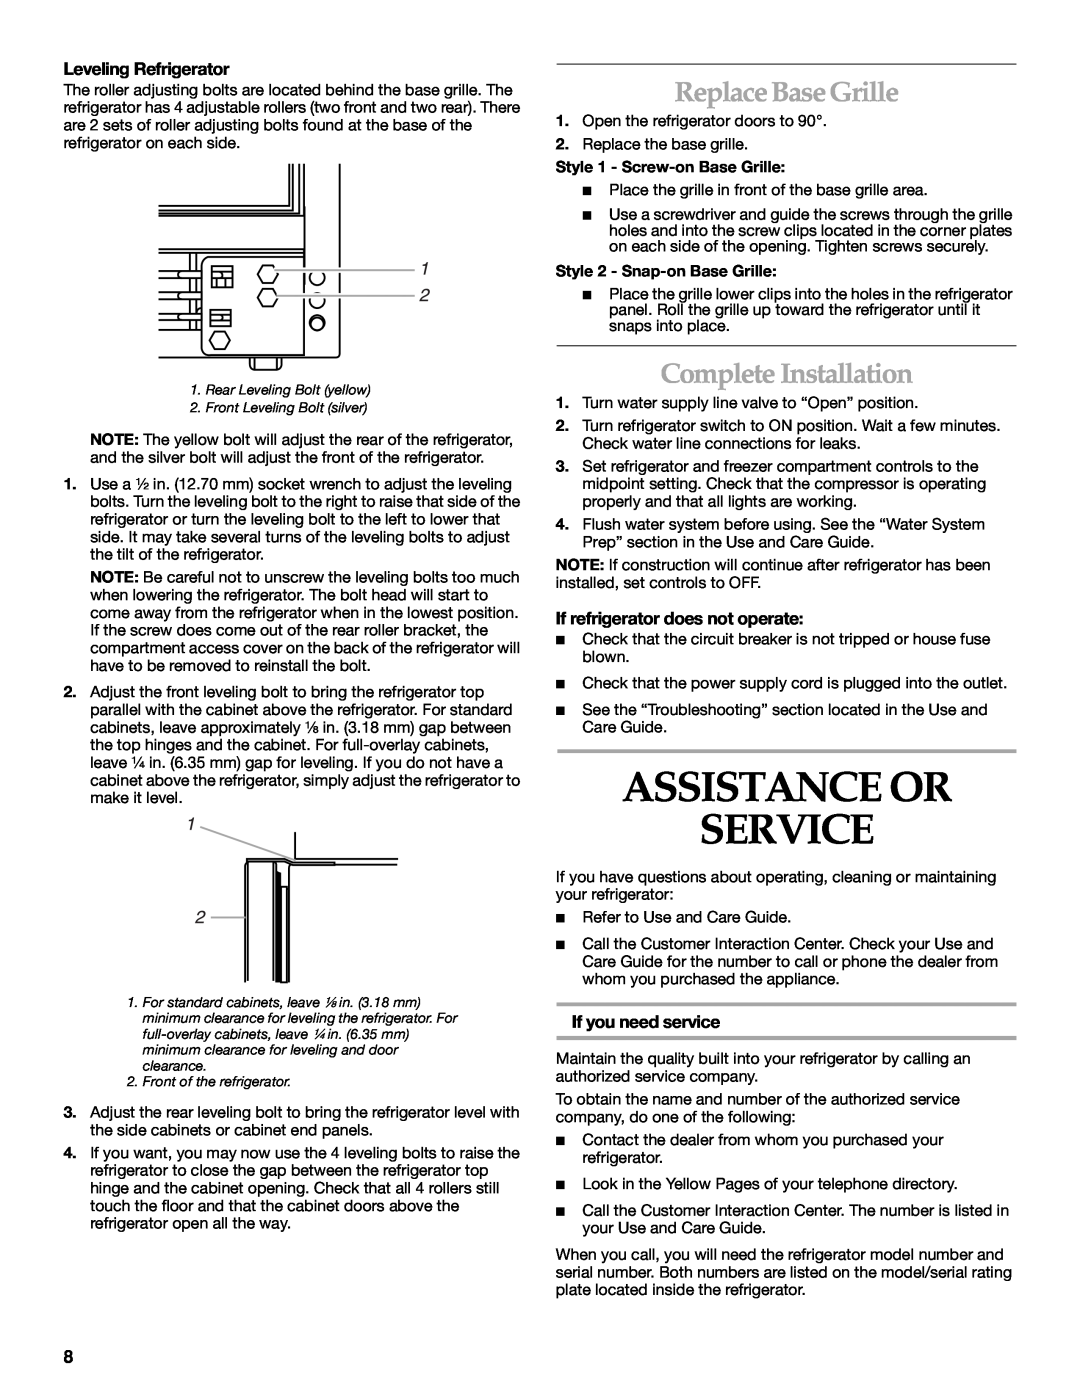 KitchenAid 2221514A Assistance Or Service, Replace Base Grille, Complete Installation, Leveling Refrigerator 